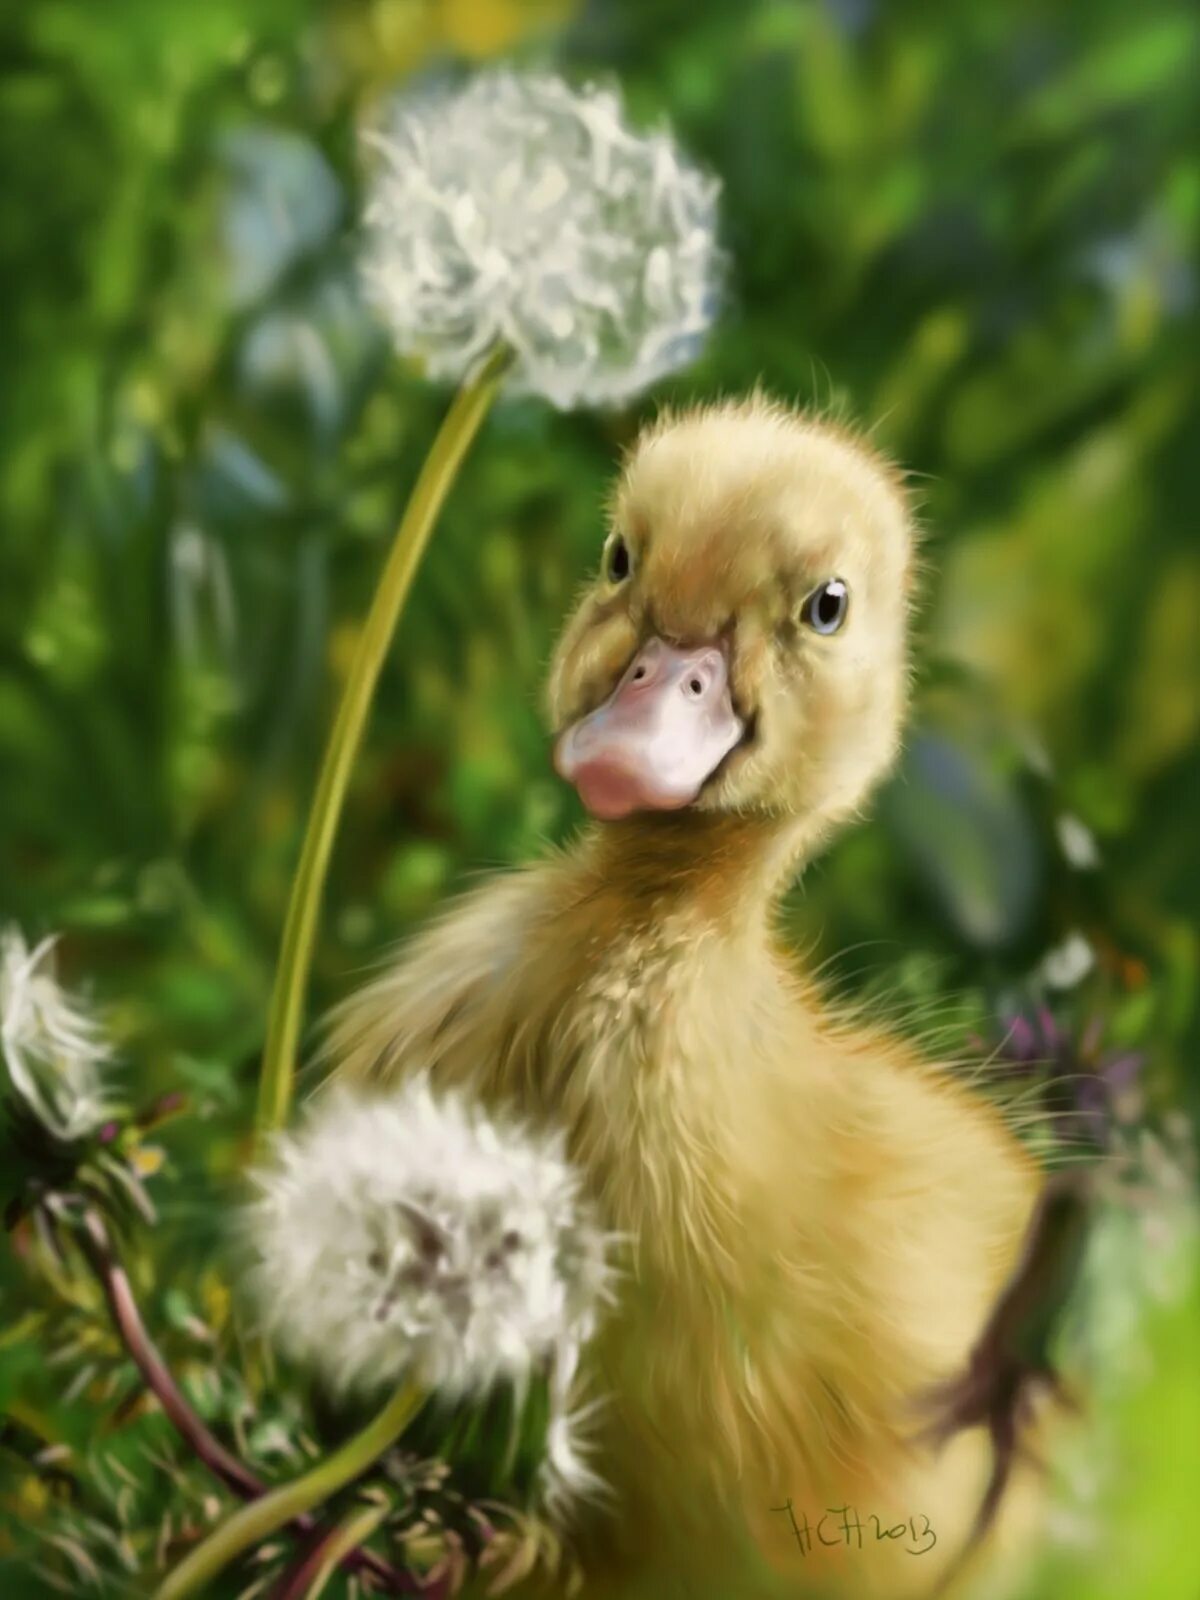 Fluffing a duck